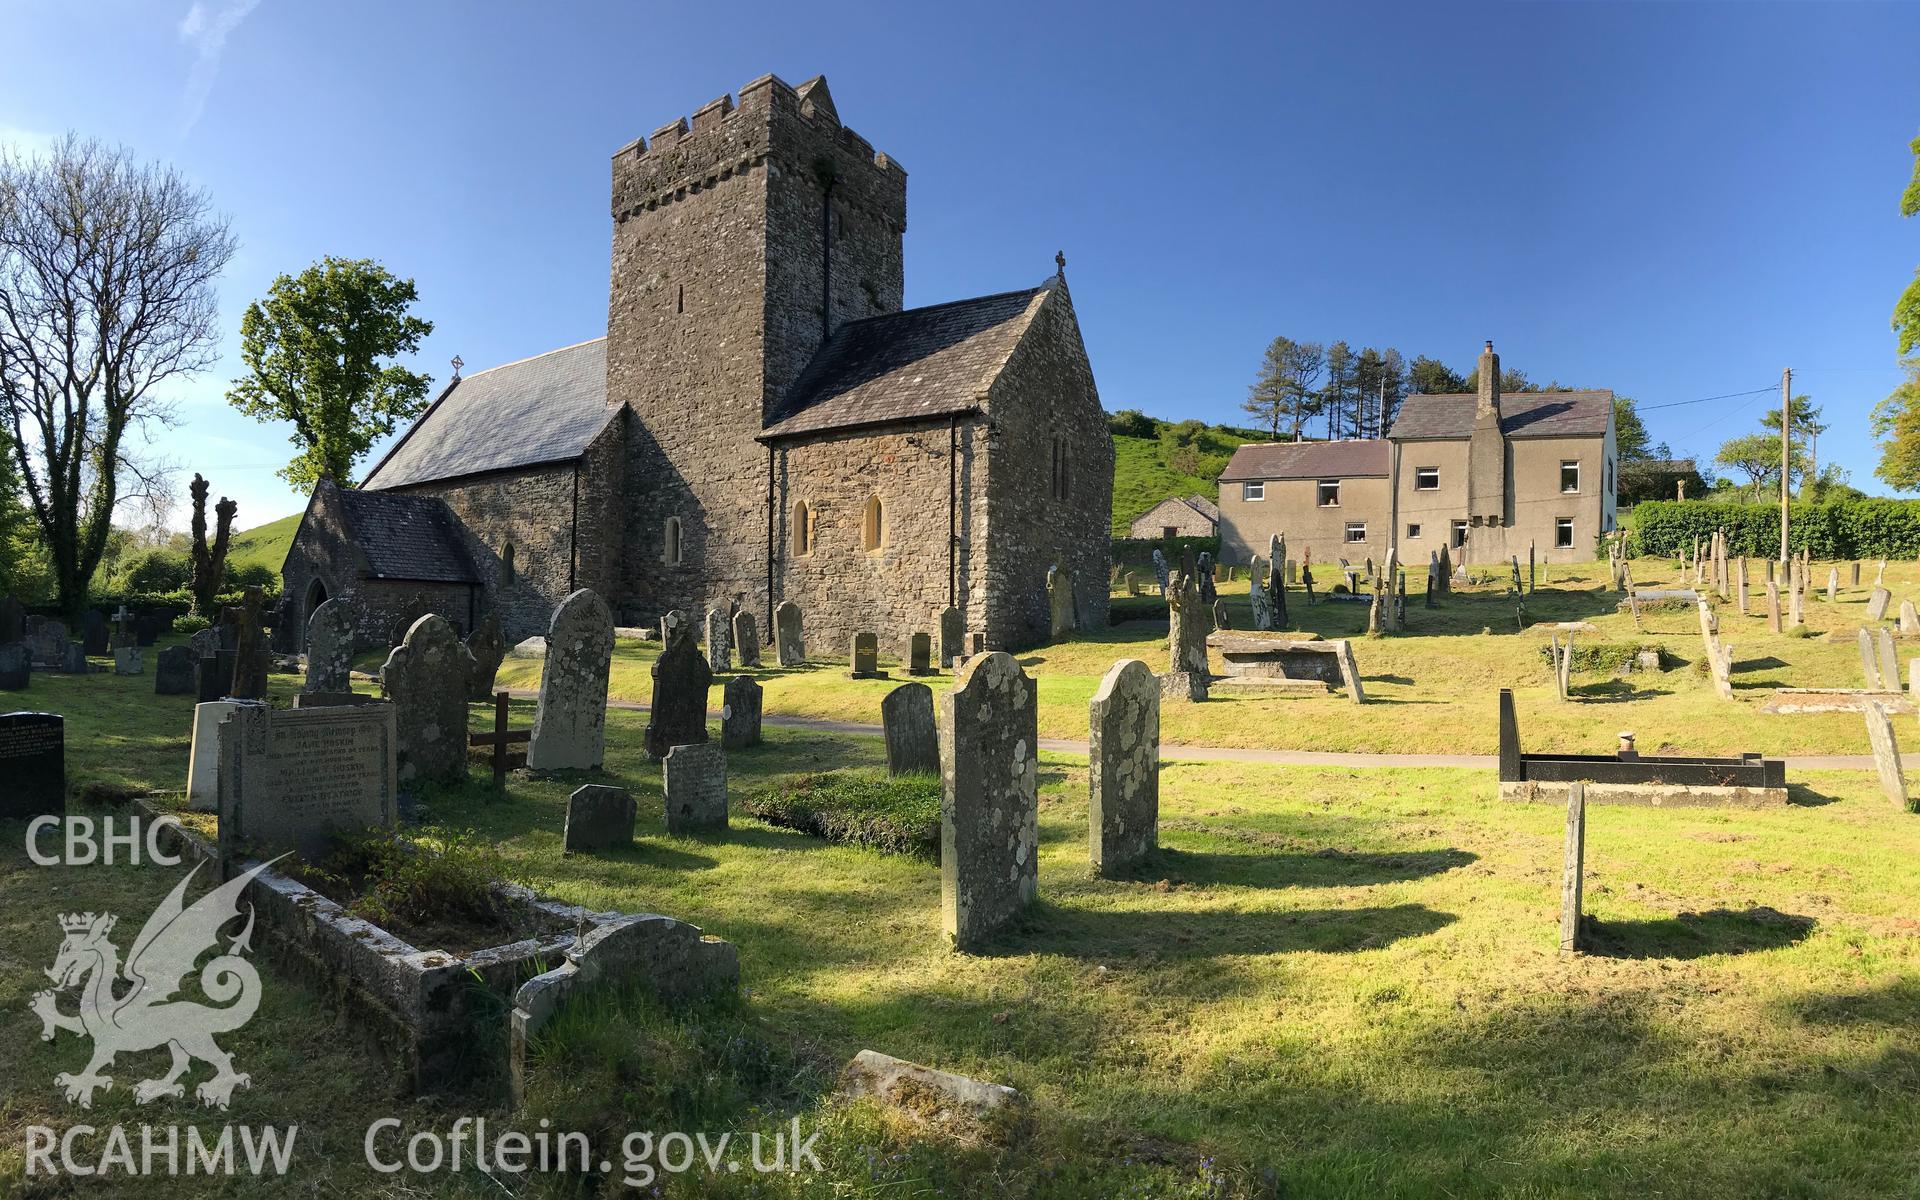 Colour photo showing the exterior of St. Cadog's Church and associated graveyard in Cheriton, taken by Paul R. Davis, 19th May 2018.